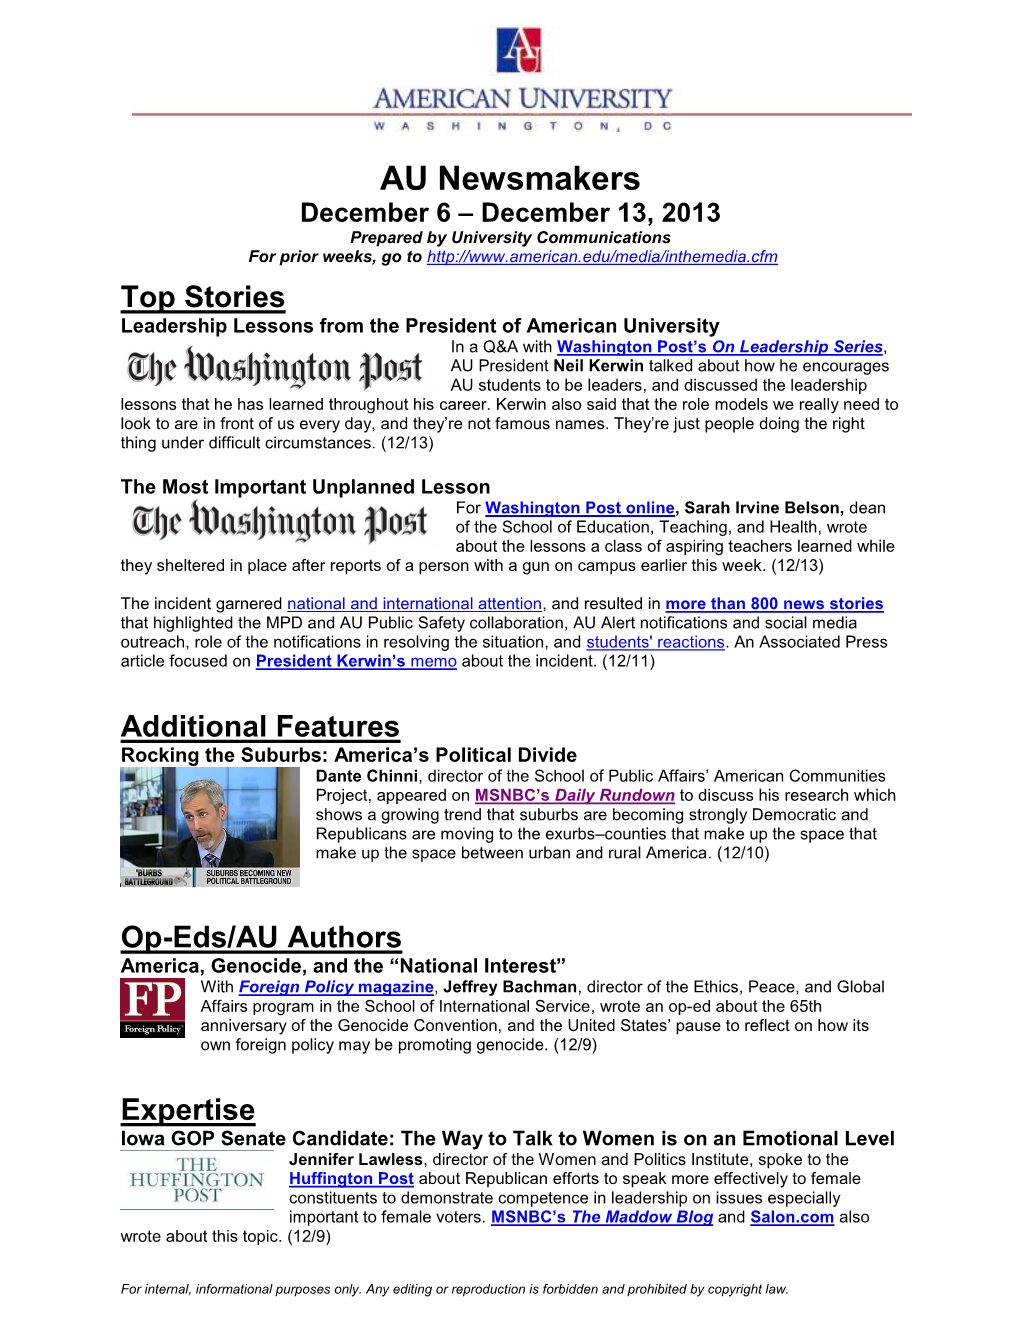 AU Newsmakers December 6 – December 13, 2013 Prepared by University Communications for Prior Weeks, Go To